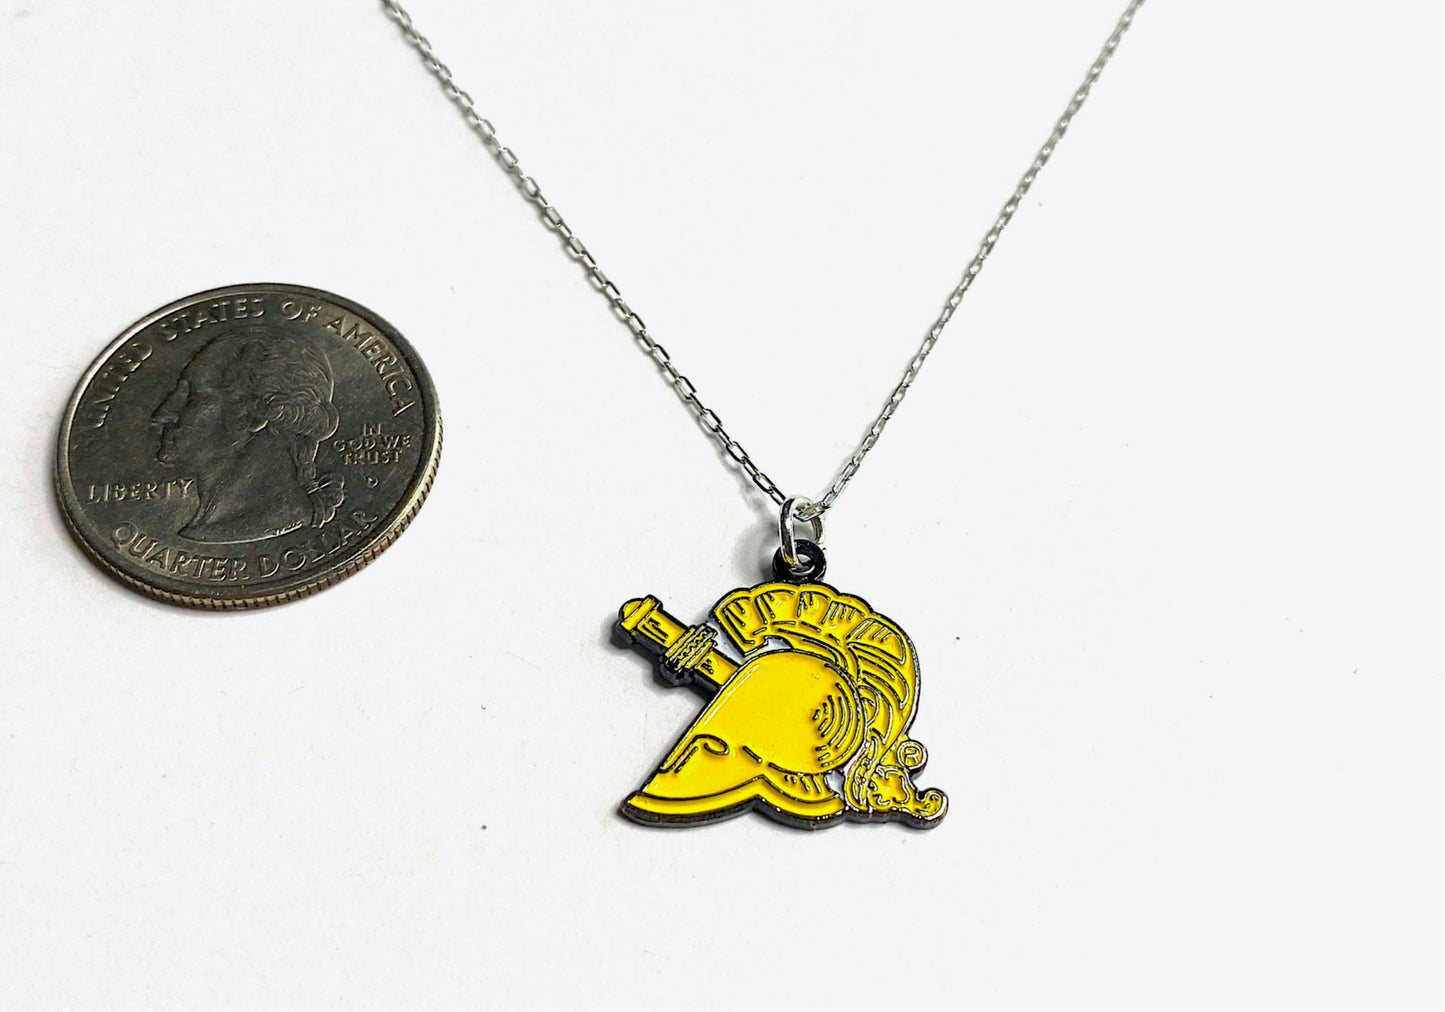 West Point Athena Yellow Charm Necklace